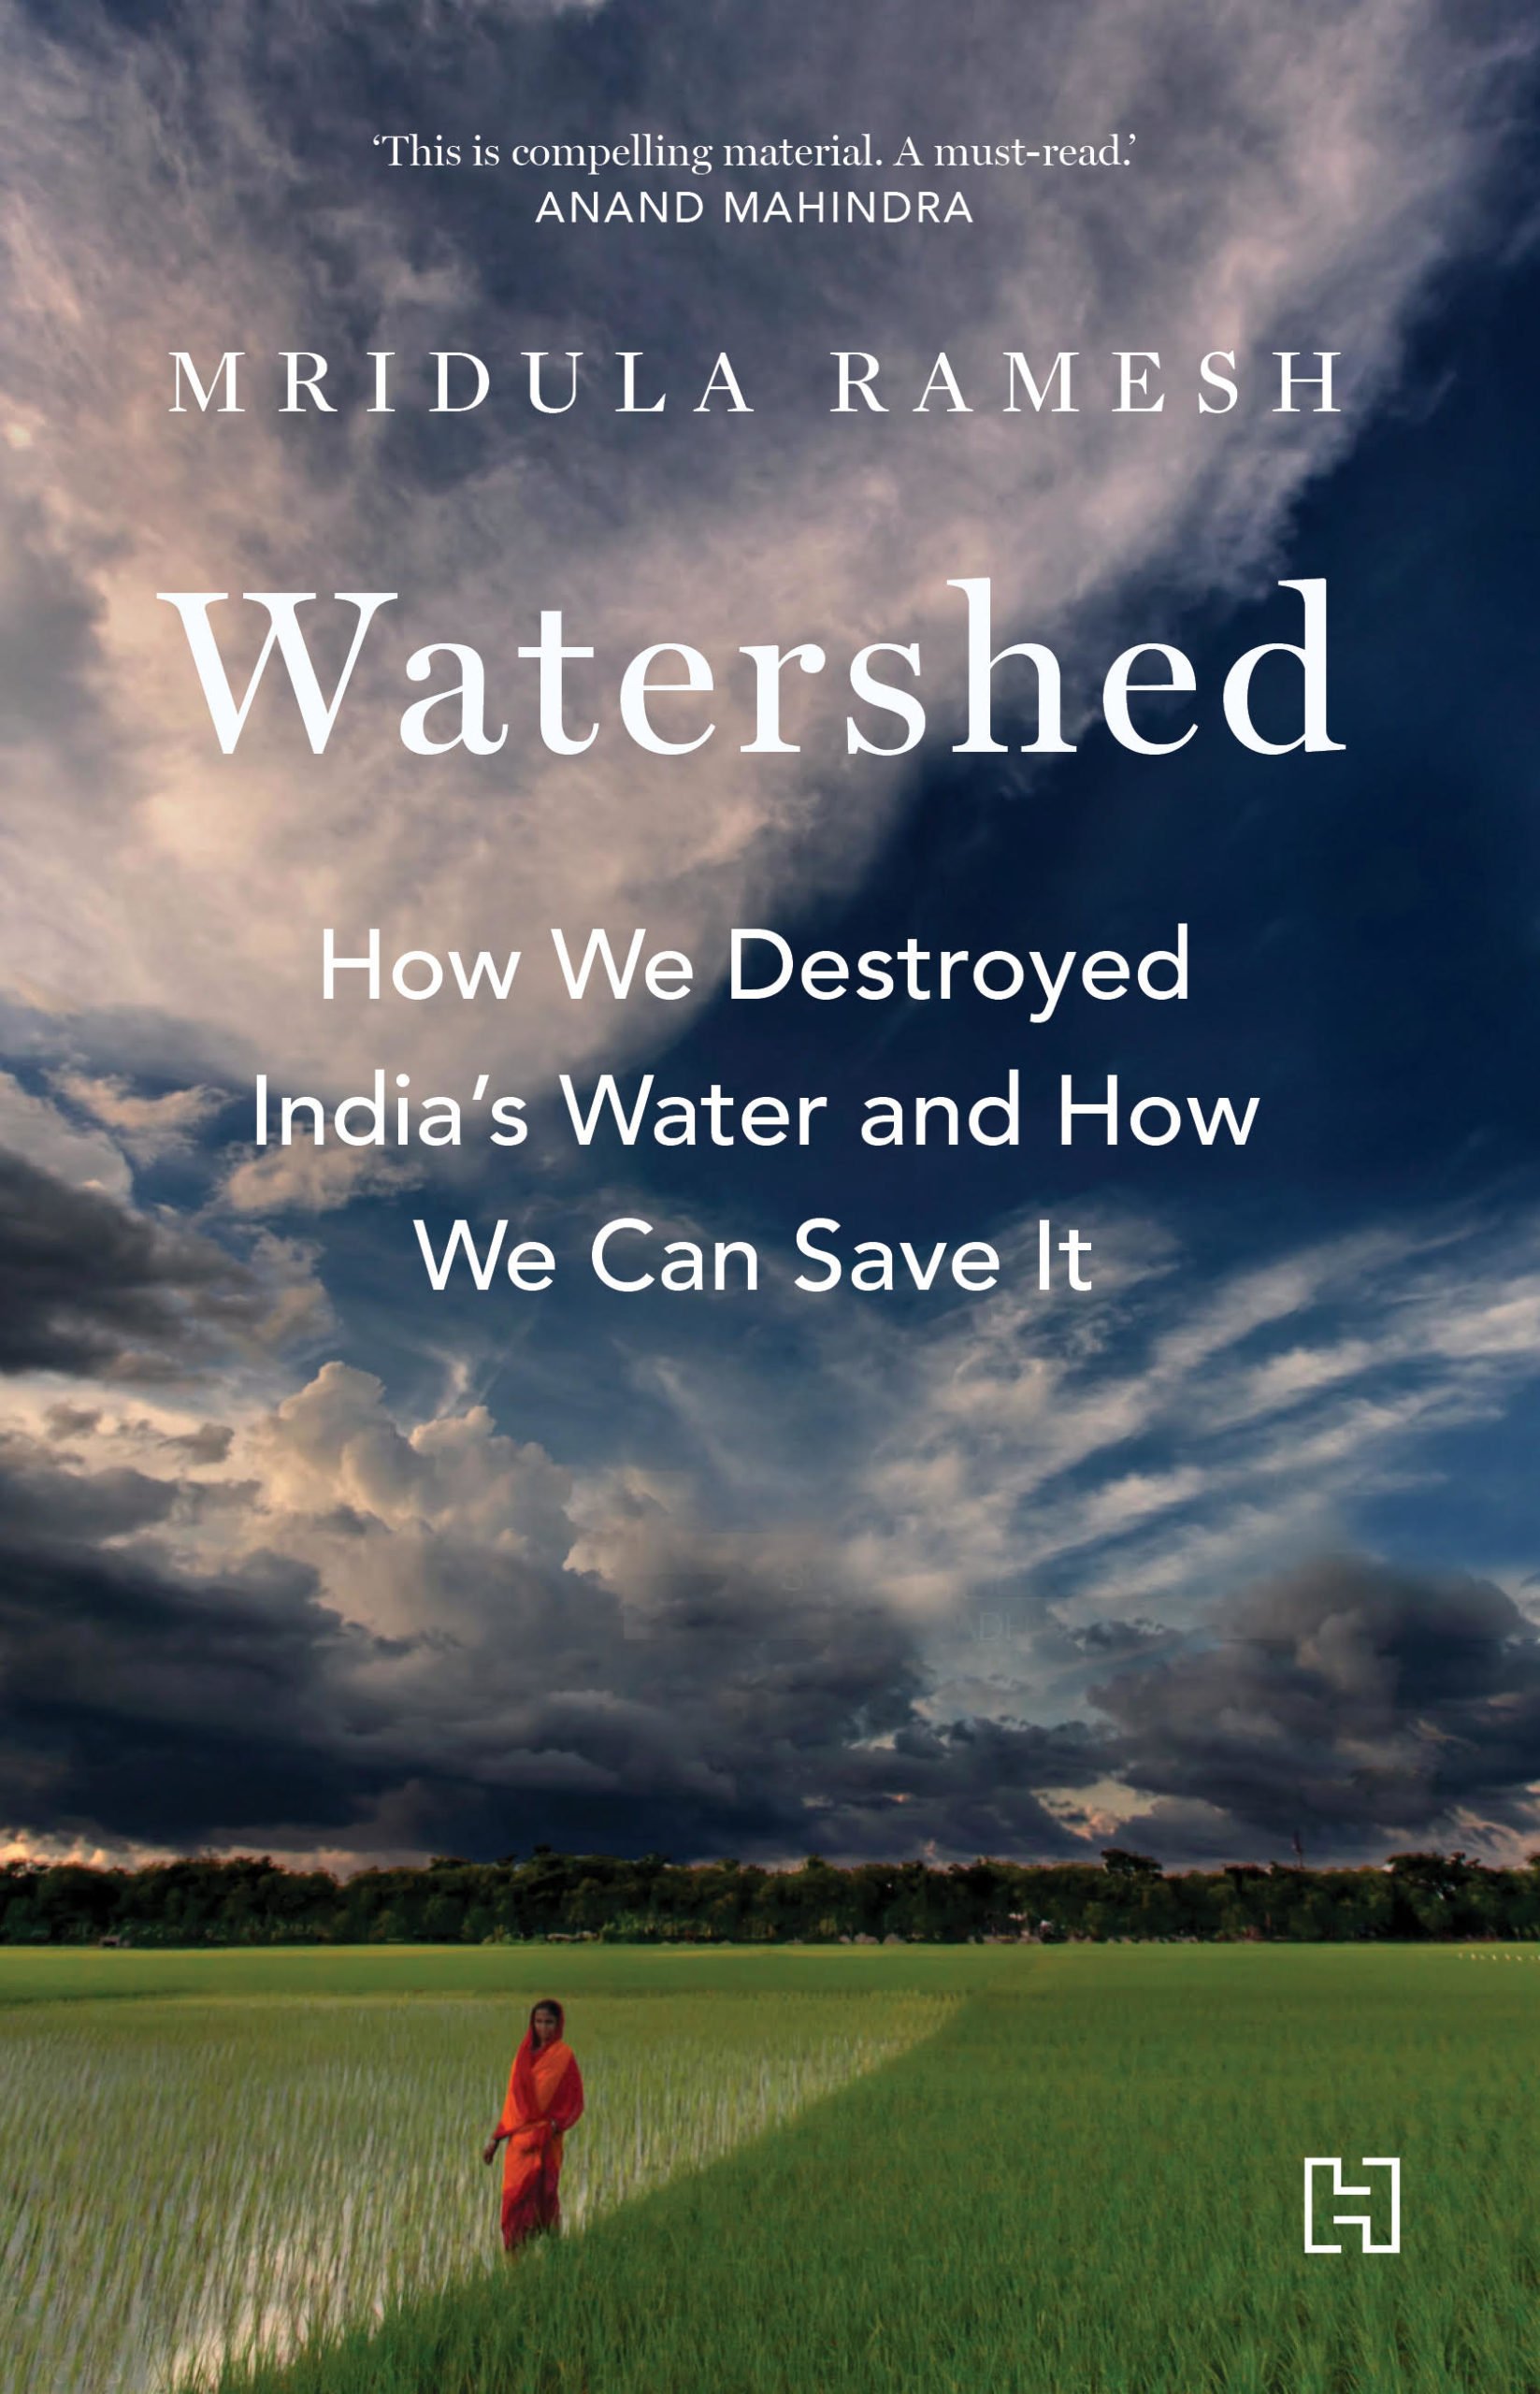 Review: ‘Watershed’ puts inequality at the heart of India’s water crisis